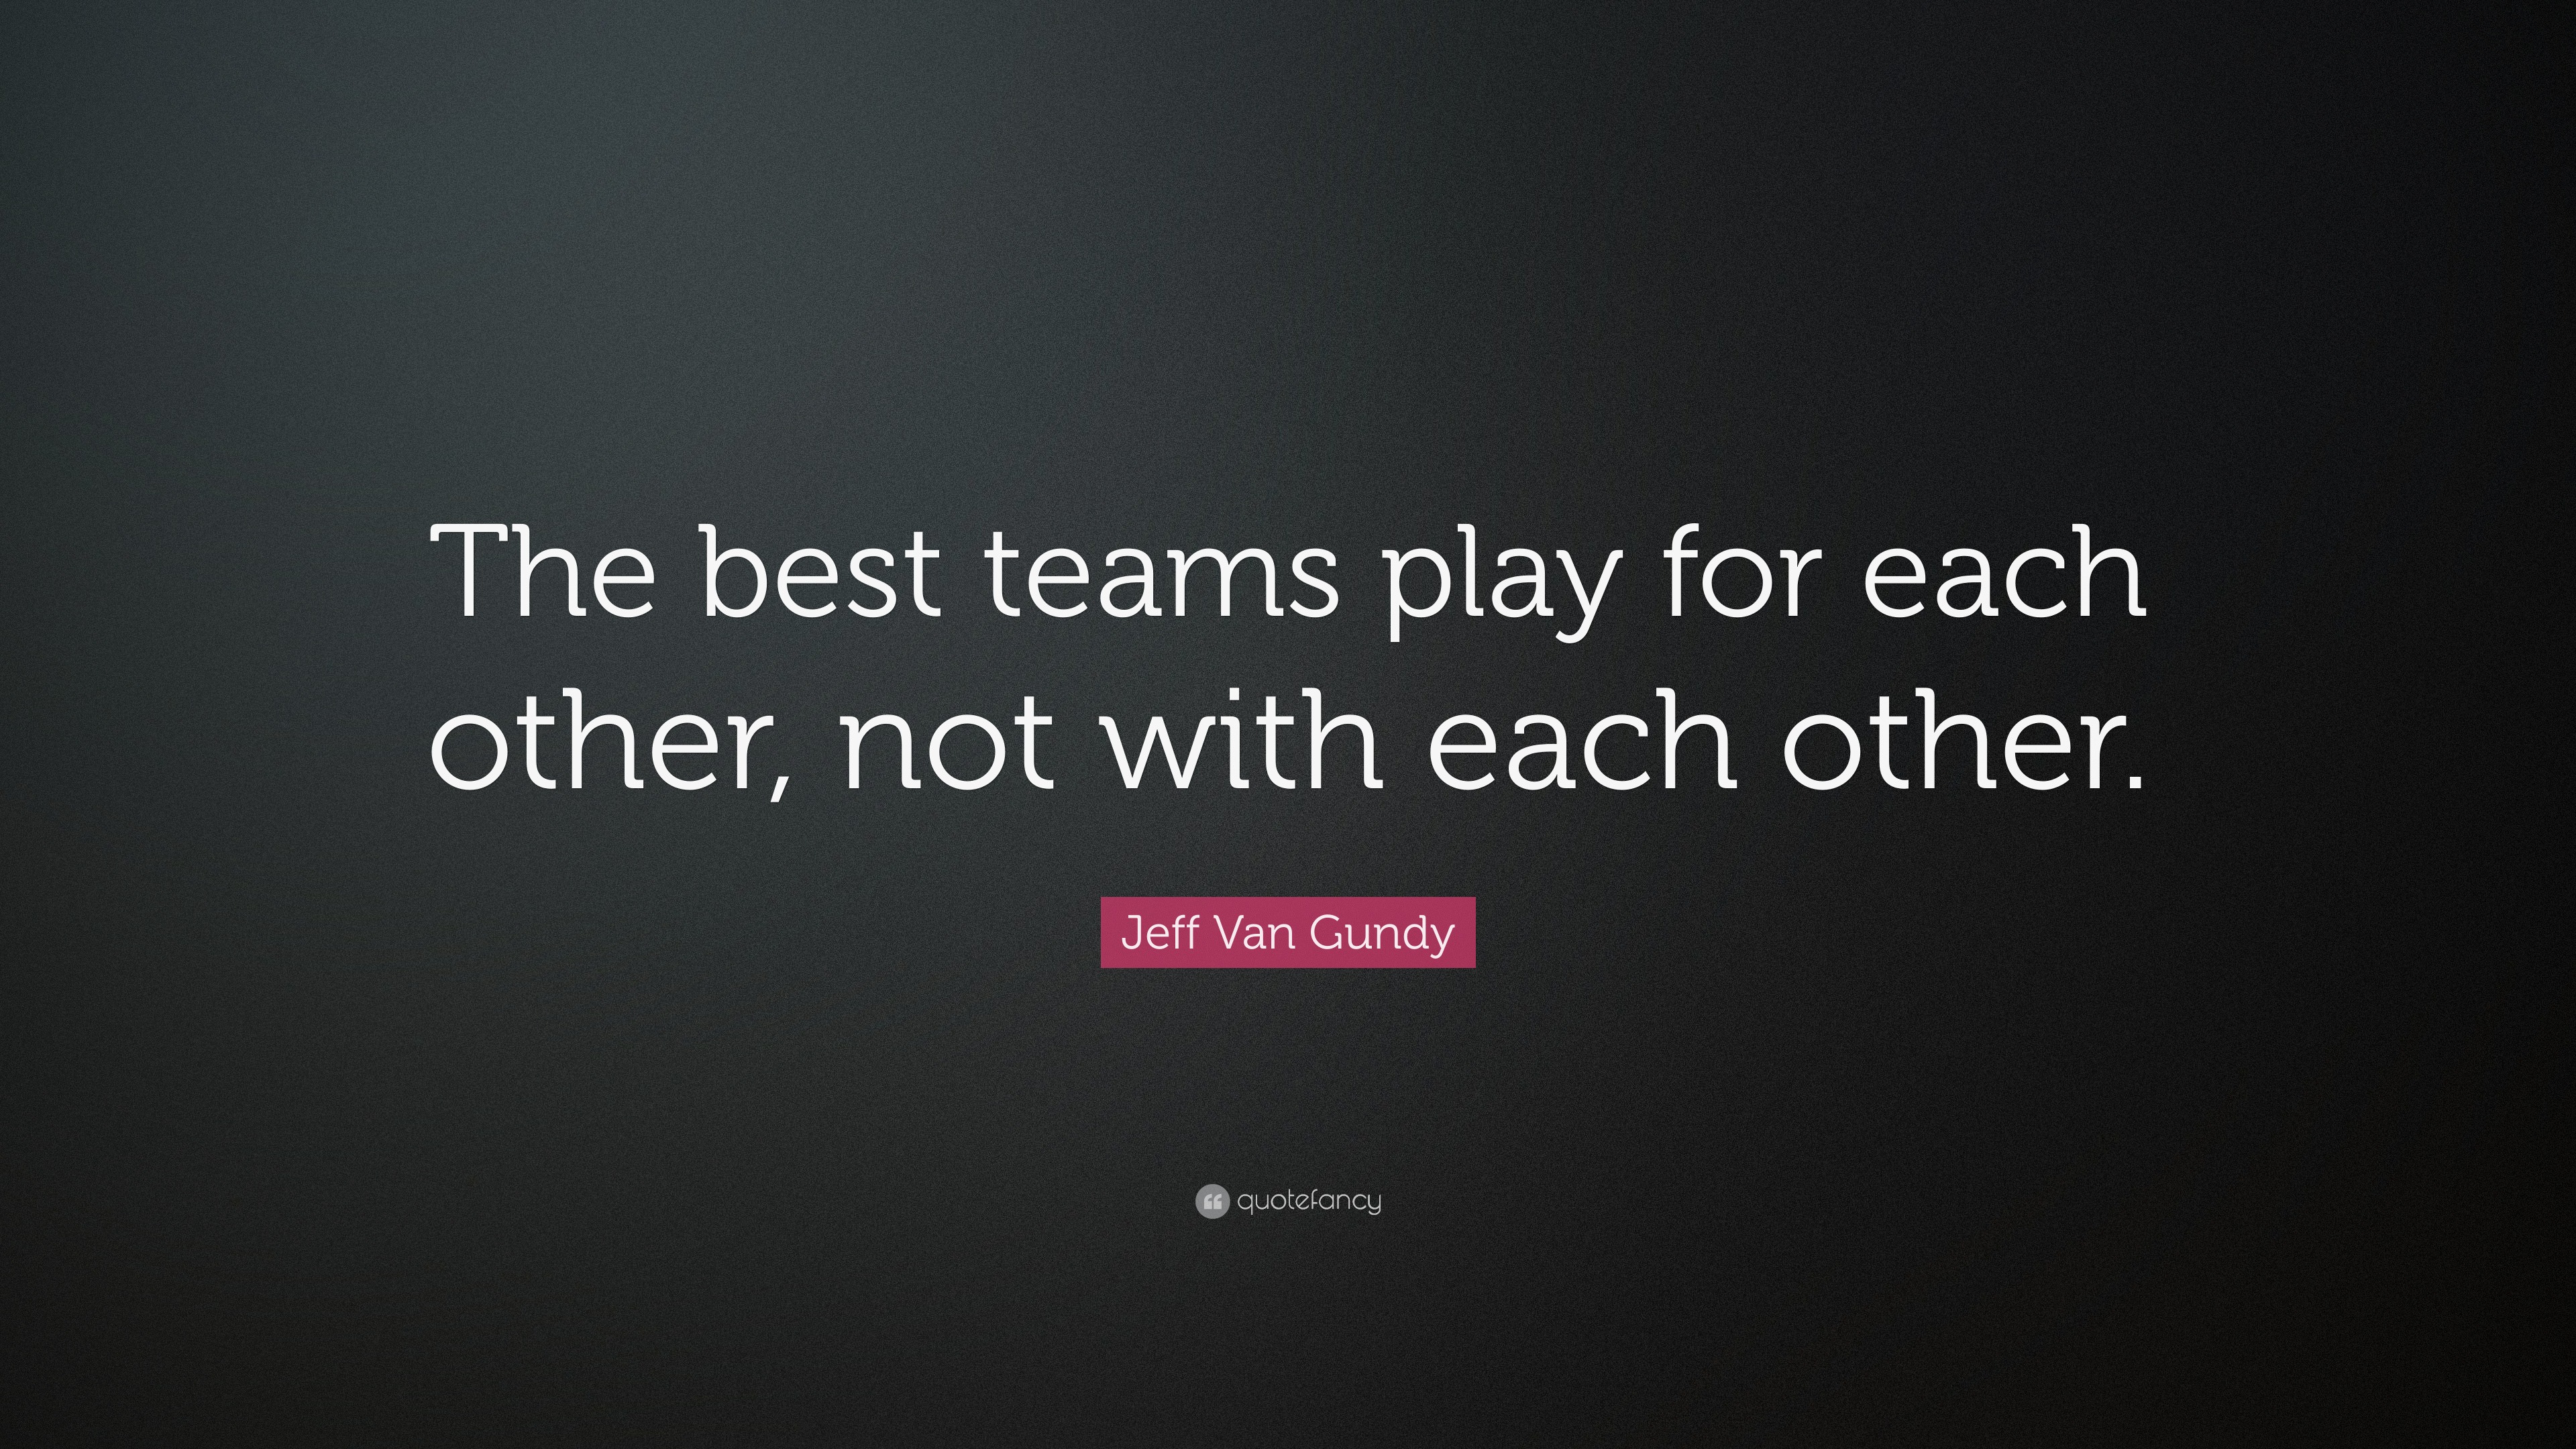 Jeff Van Gundy Quote: “The best teams play for each other, not with ...